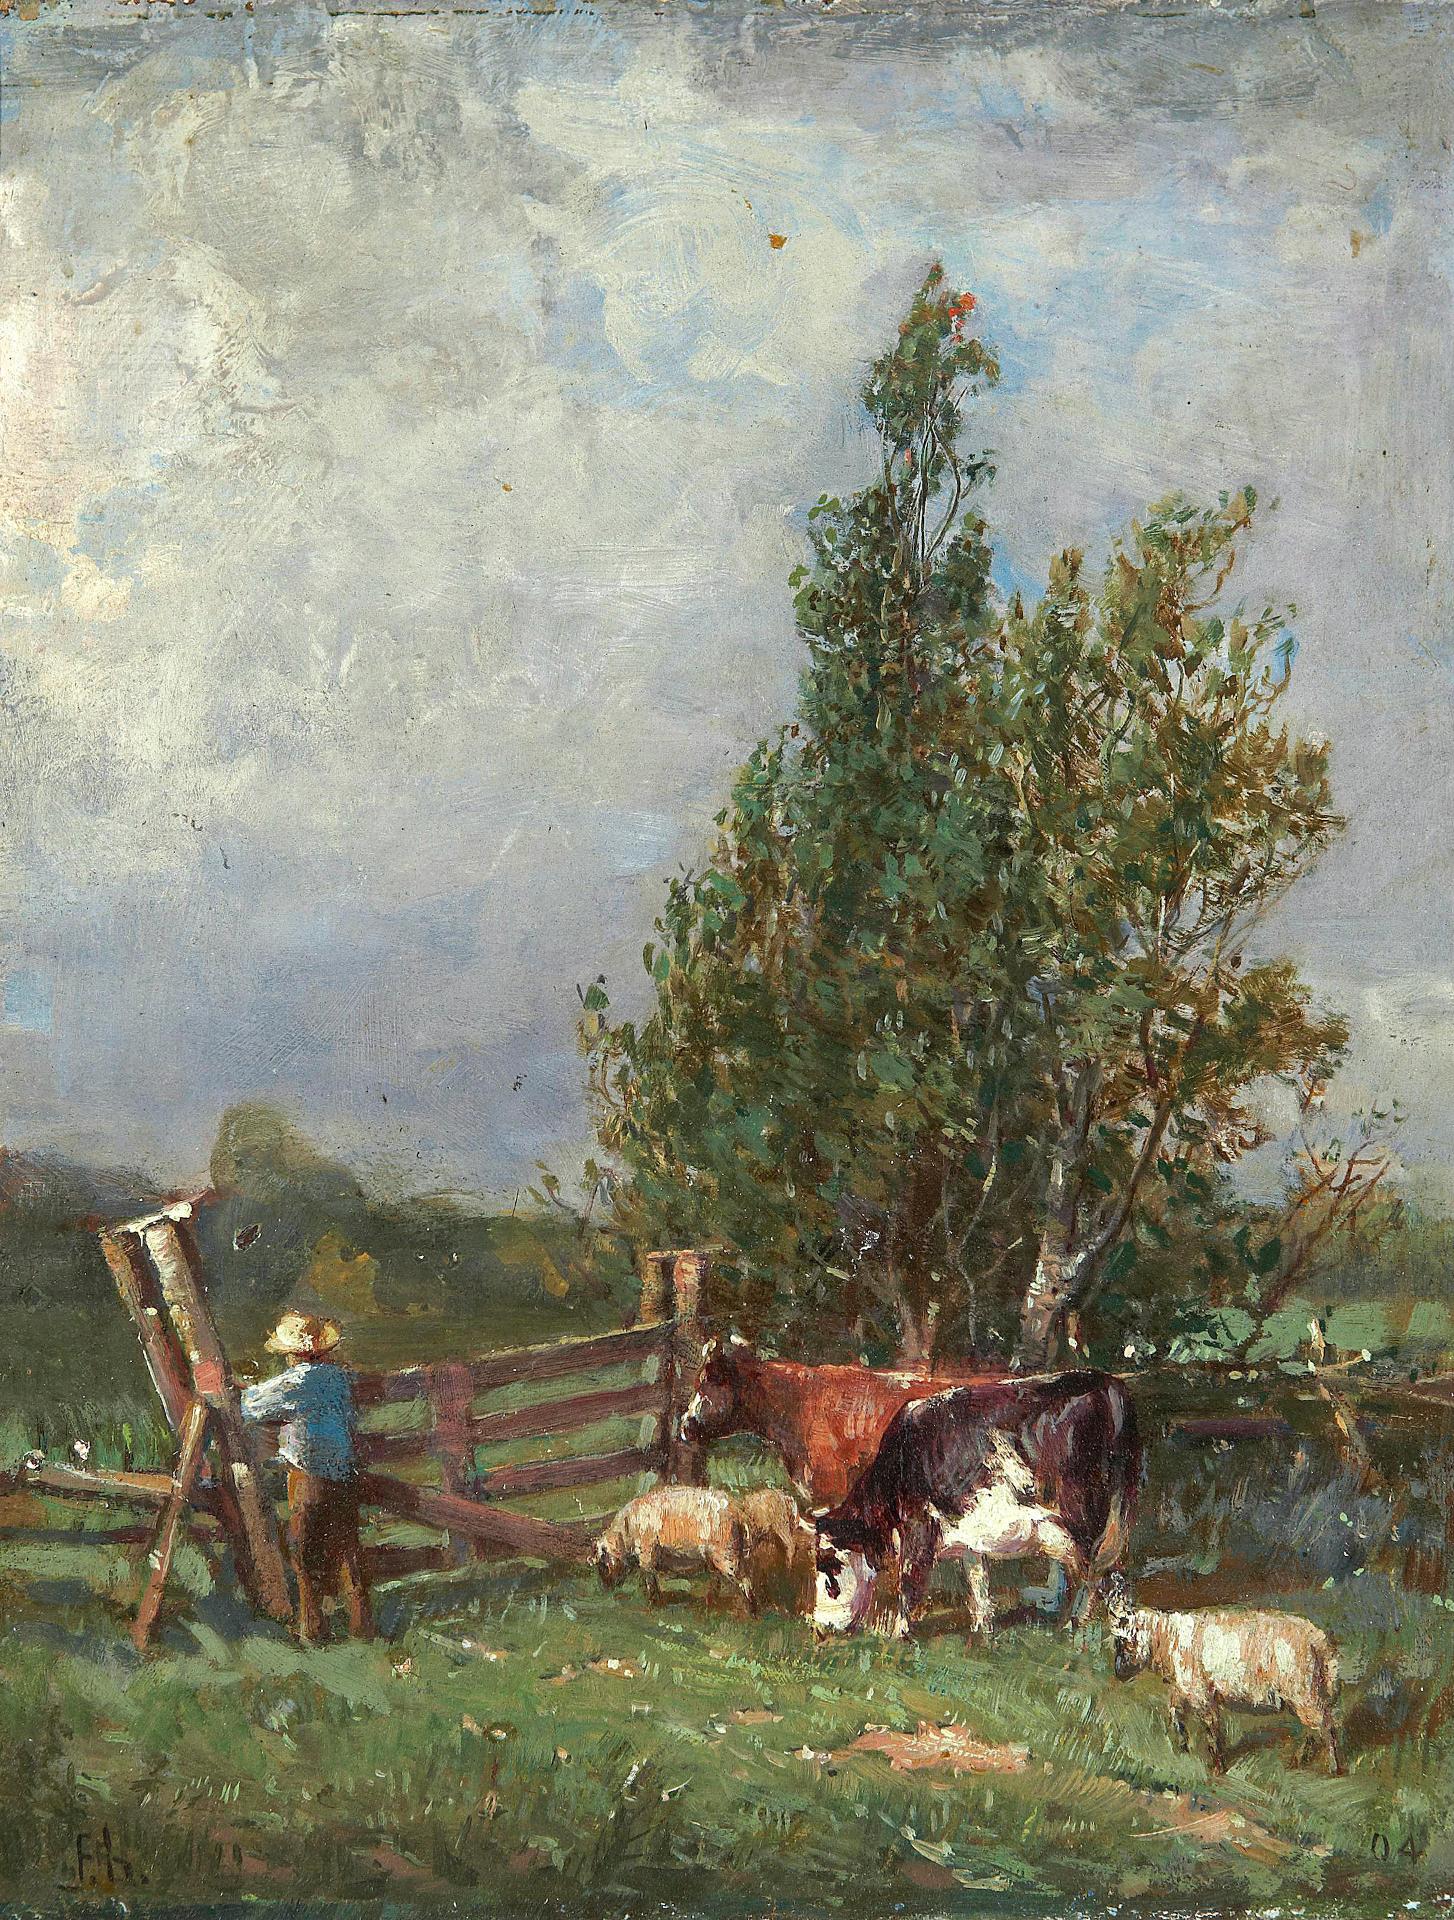 Peleg Franklin Frank Brownell (1857-1946) - Going to fresh pastures